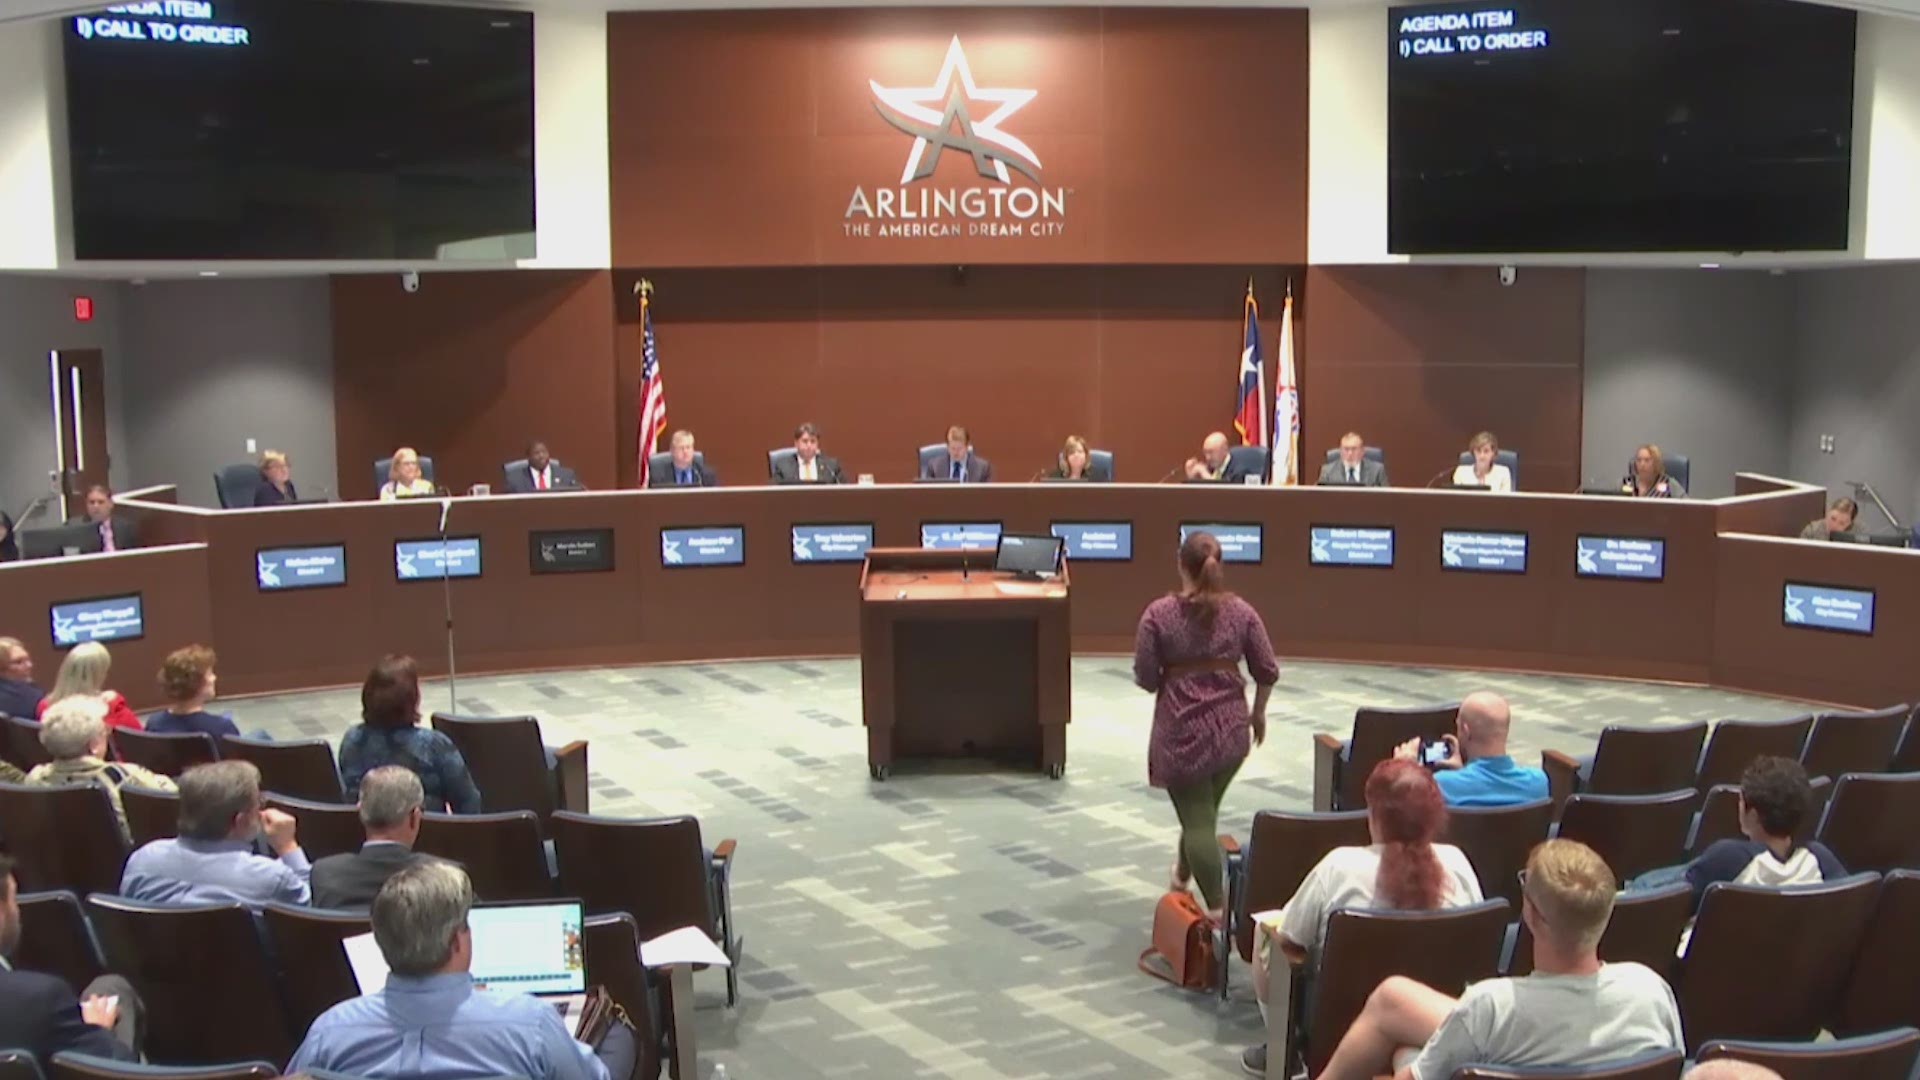 Government proceedings often start with religious prayer. Tuesday’s city council meeting in Arlington started a little differently.